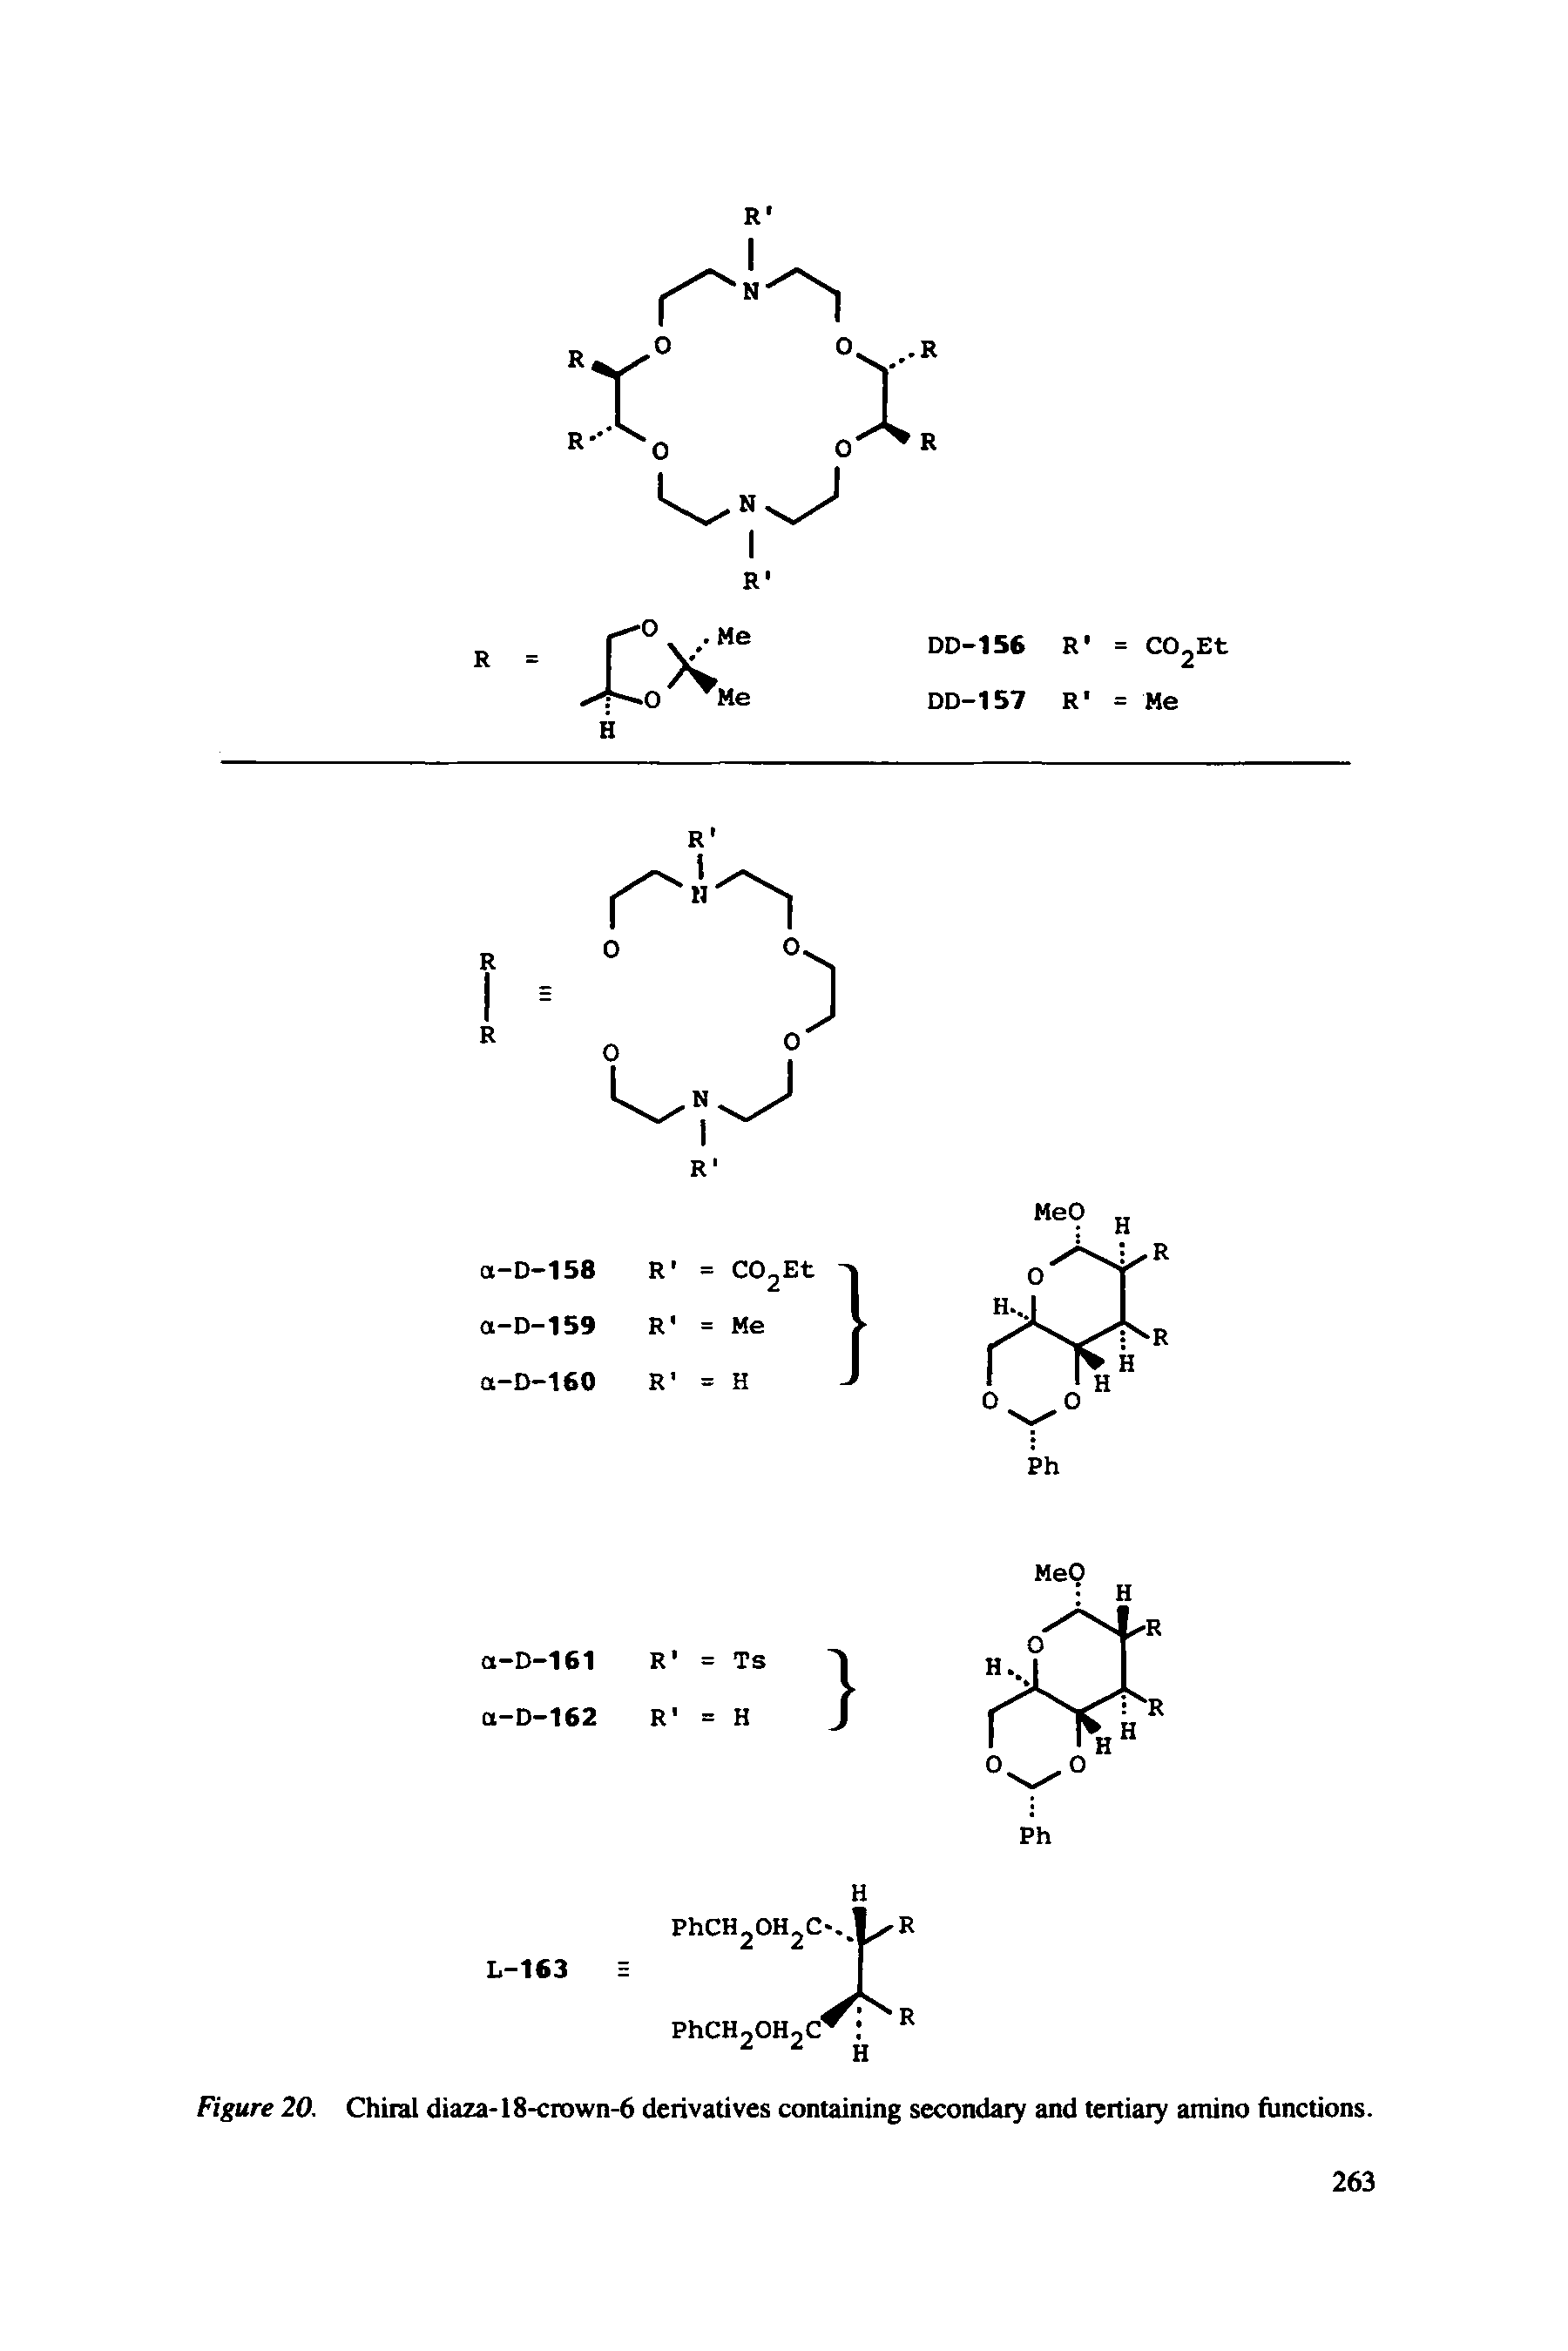 Figure 20. Chiral diaza-18-crown-6 derivatives containing secondary and tertiary amino functions.